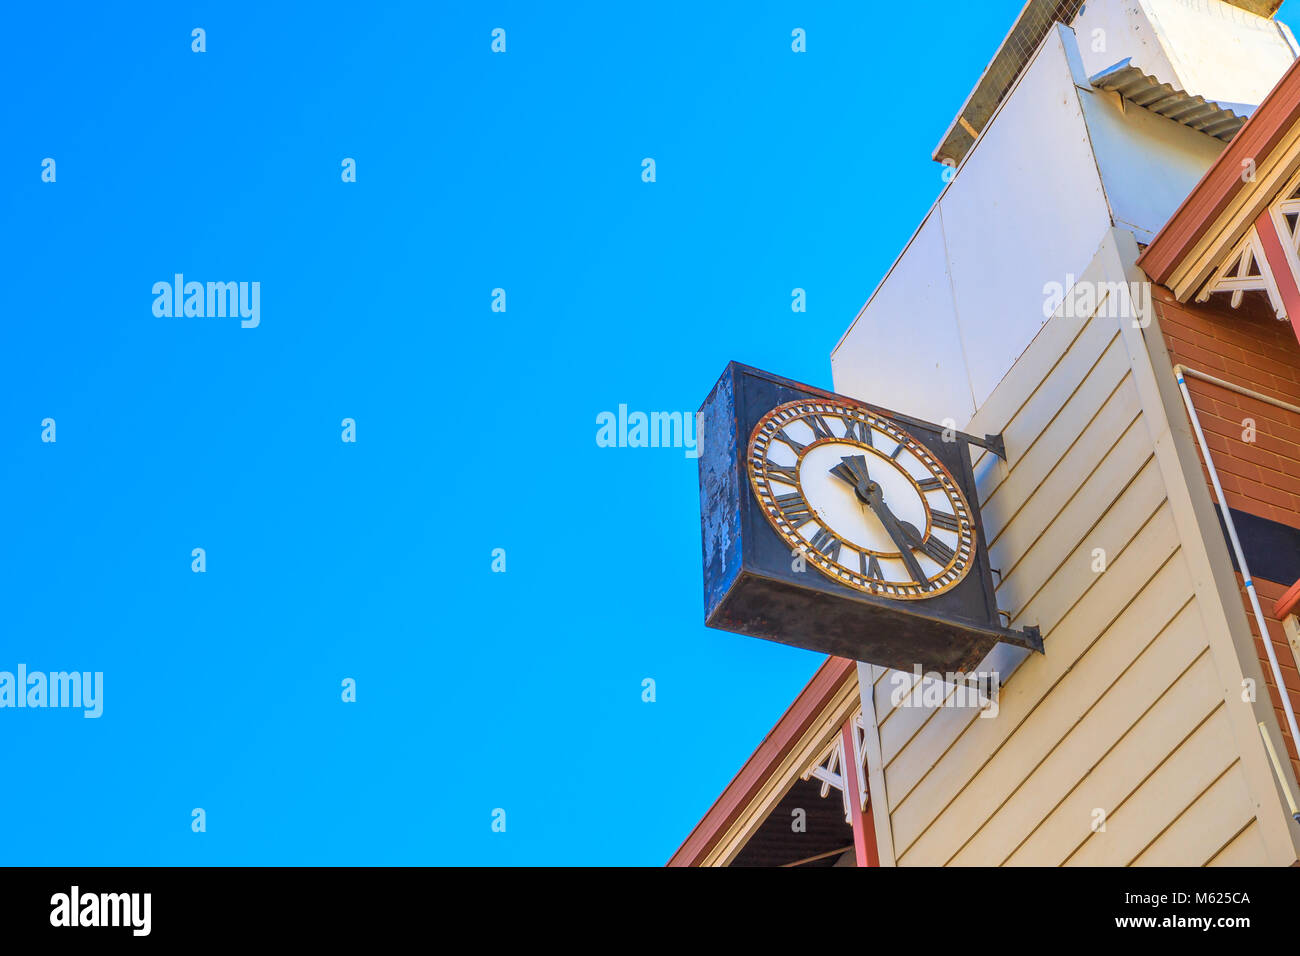 Close-up of old clock on a historic building constructed in 1908 on Avon Terrace in York, in the east tourist town of Perth in Avon Valley, Western Australia. Blue sky with copy space. Stock Photo